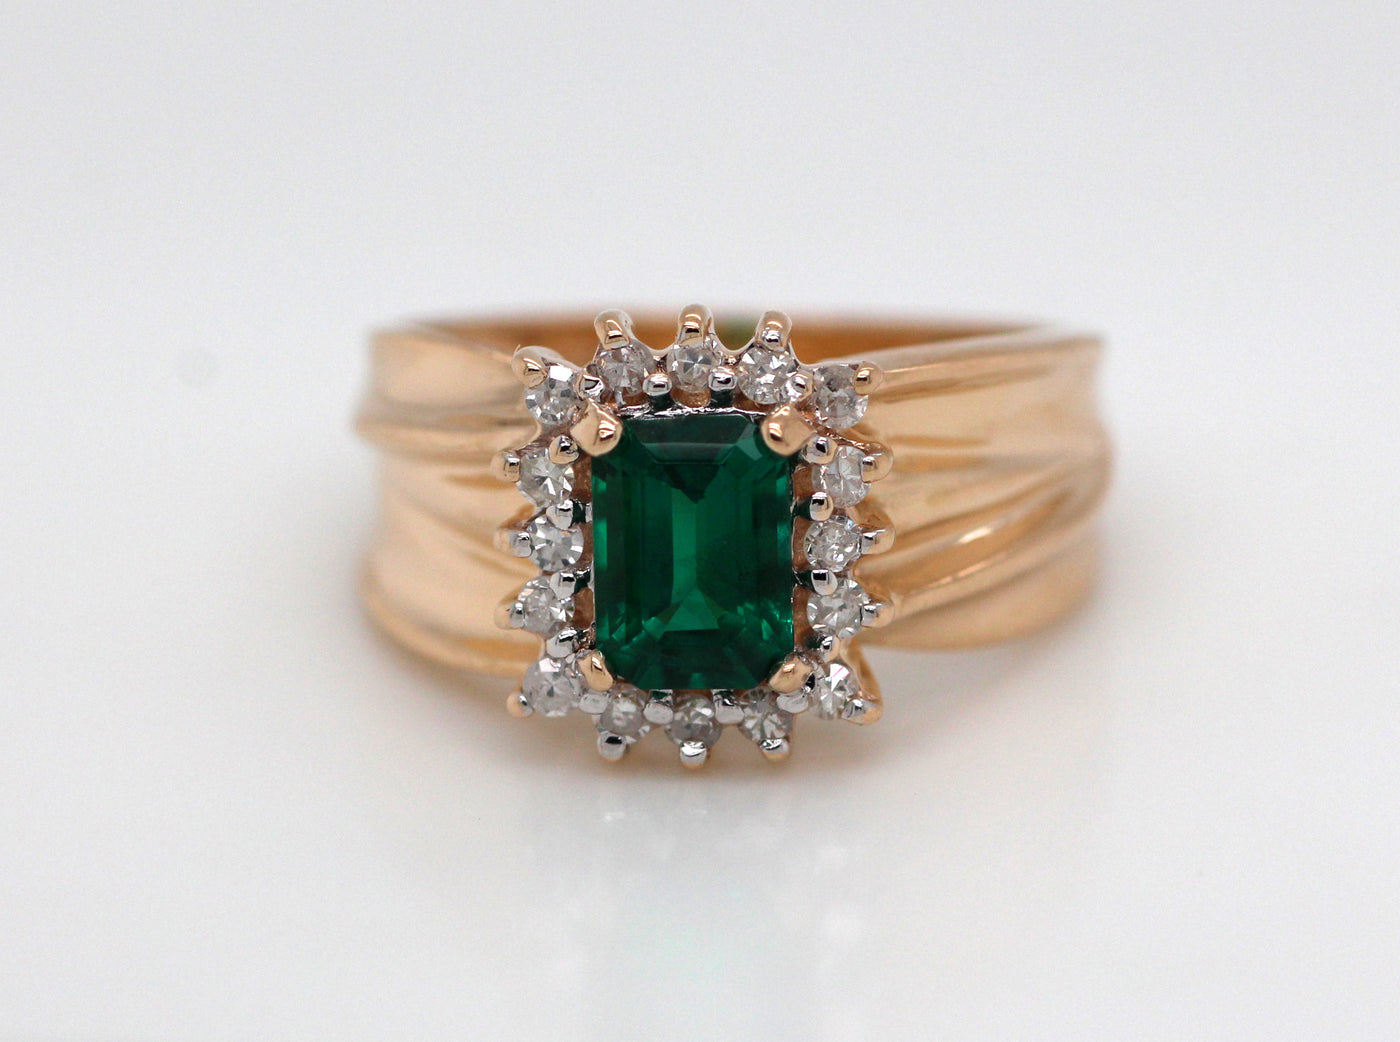 ESTATE 14KY .80 CT SYNTHETIC EMERALD AND DIAMOND RING .25 CTTW H-SI2